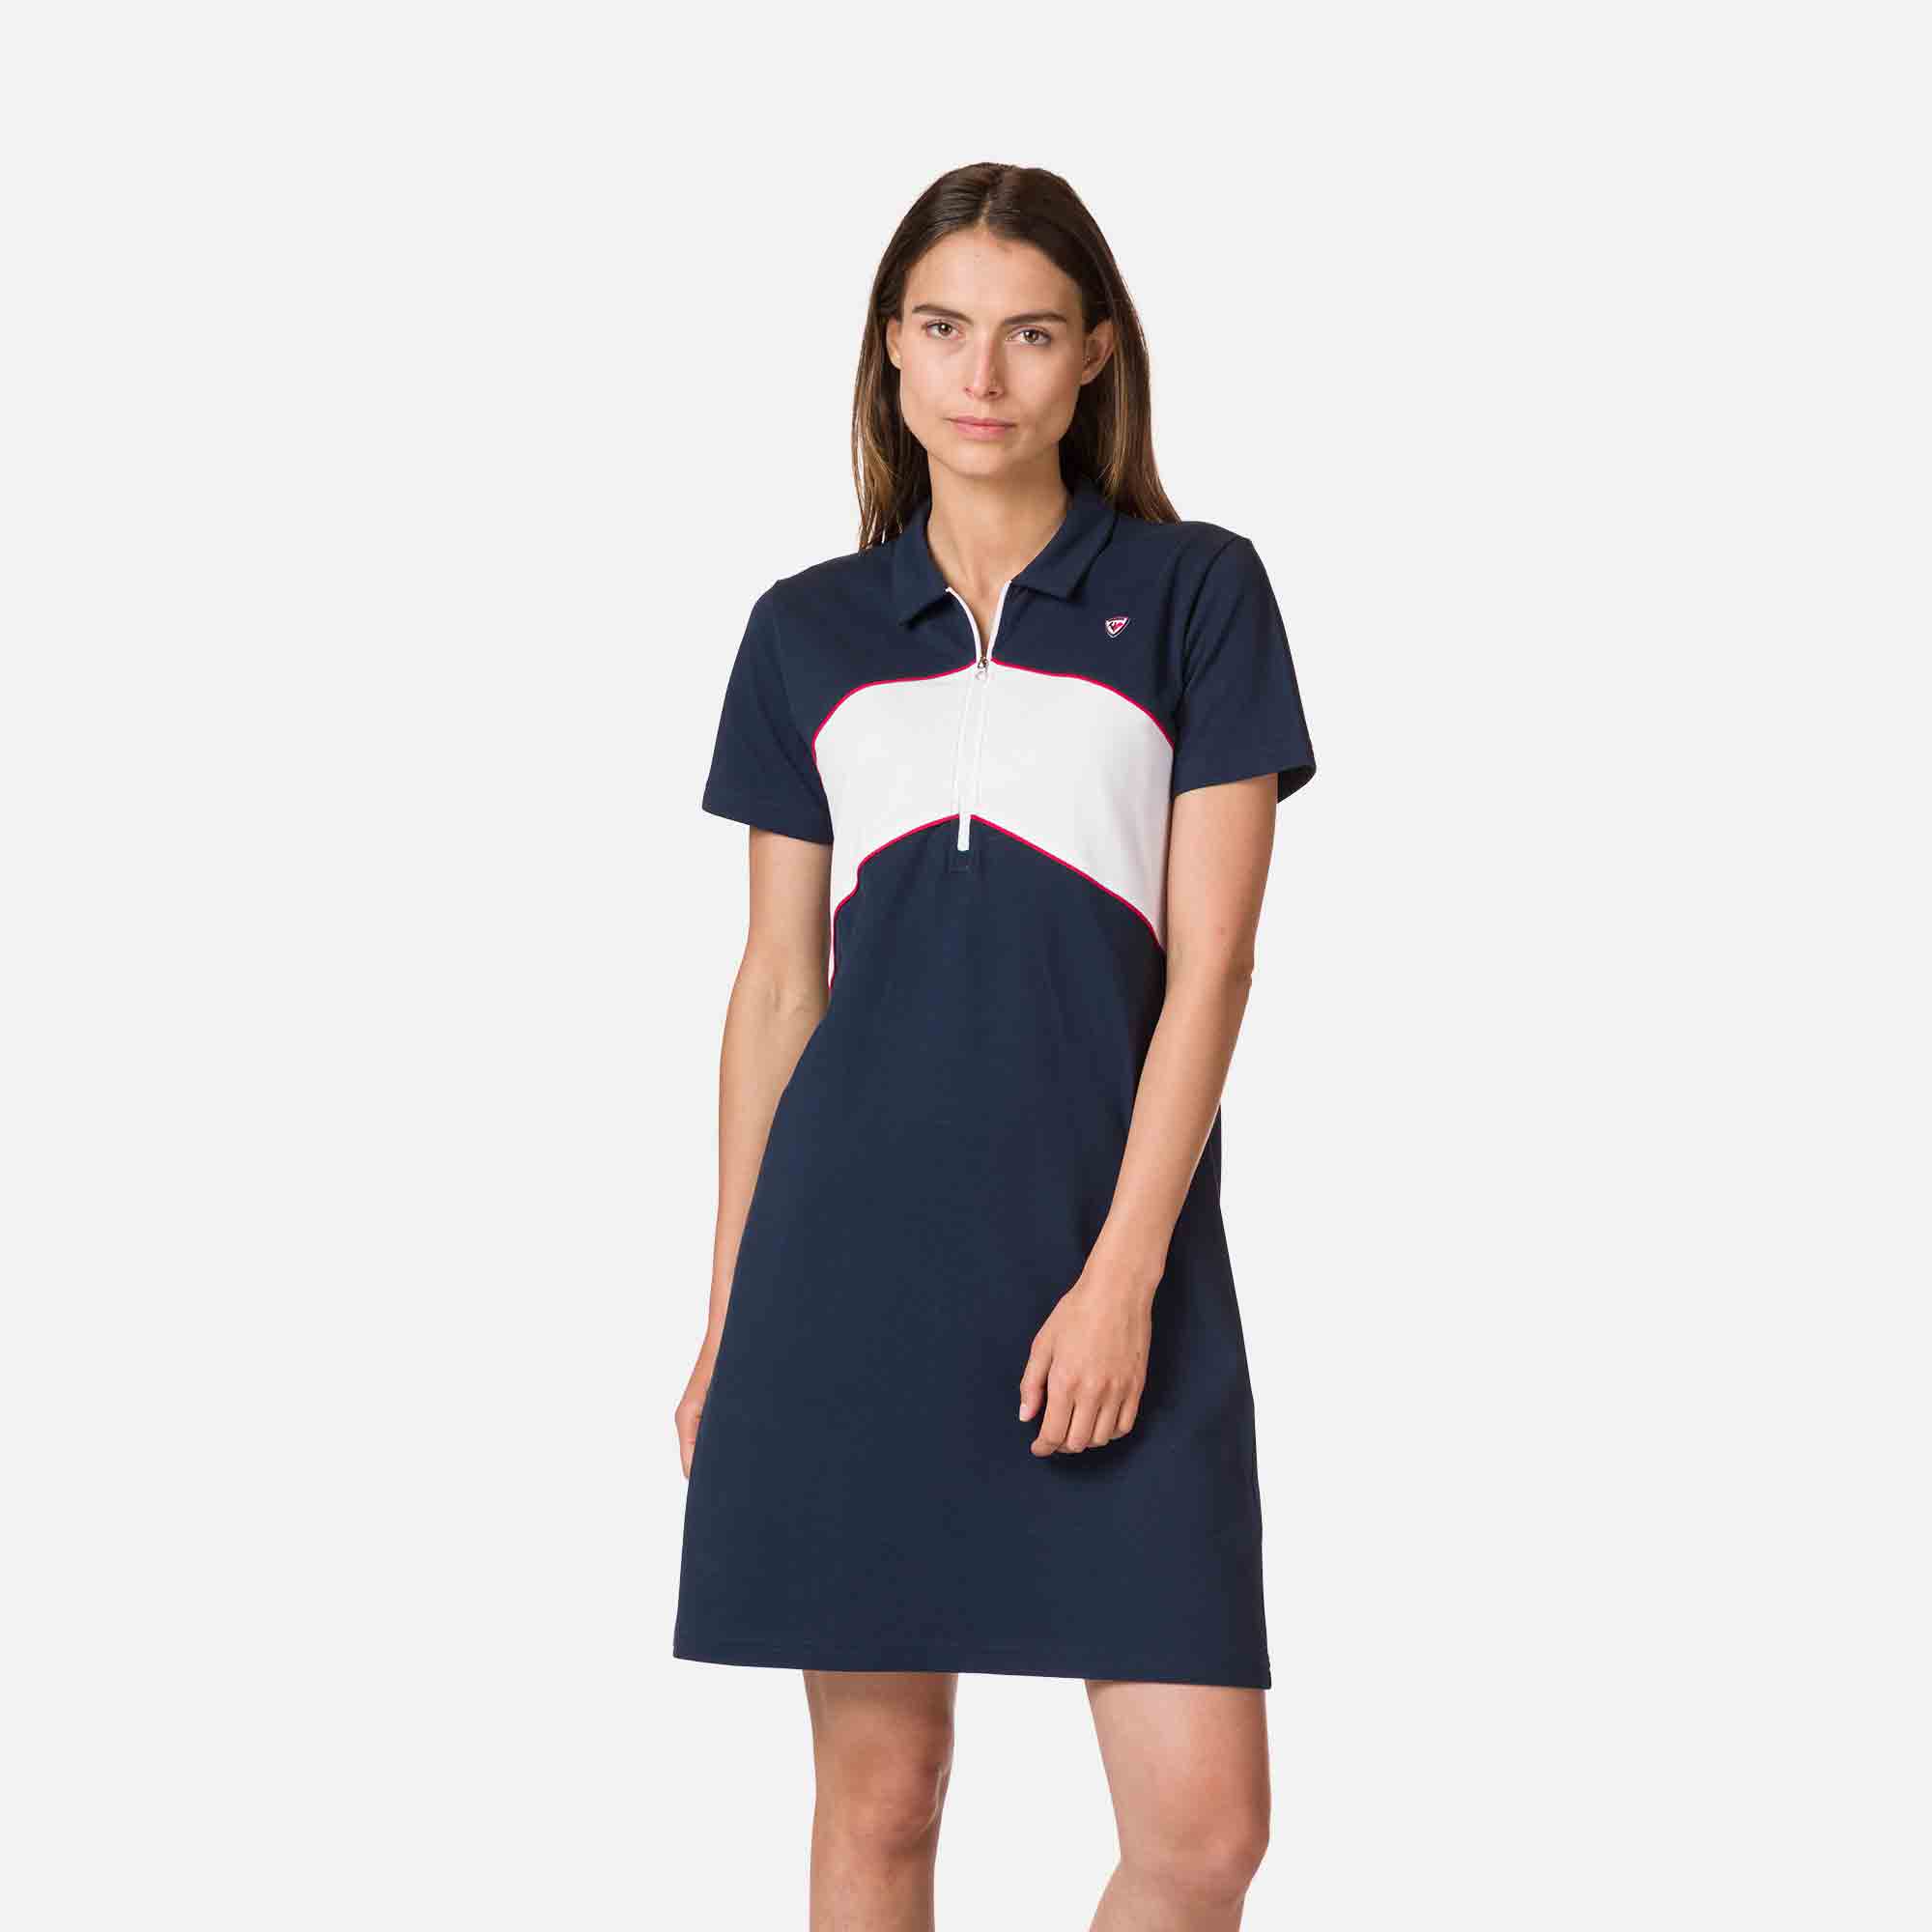 Women's polo dress relaxed